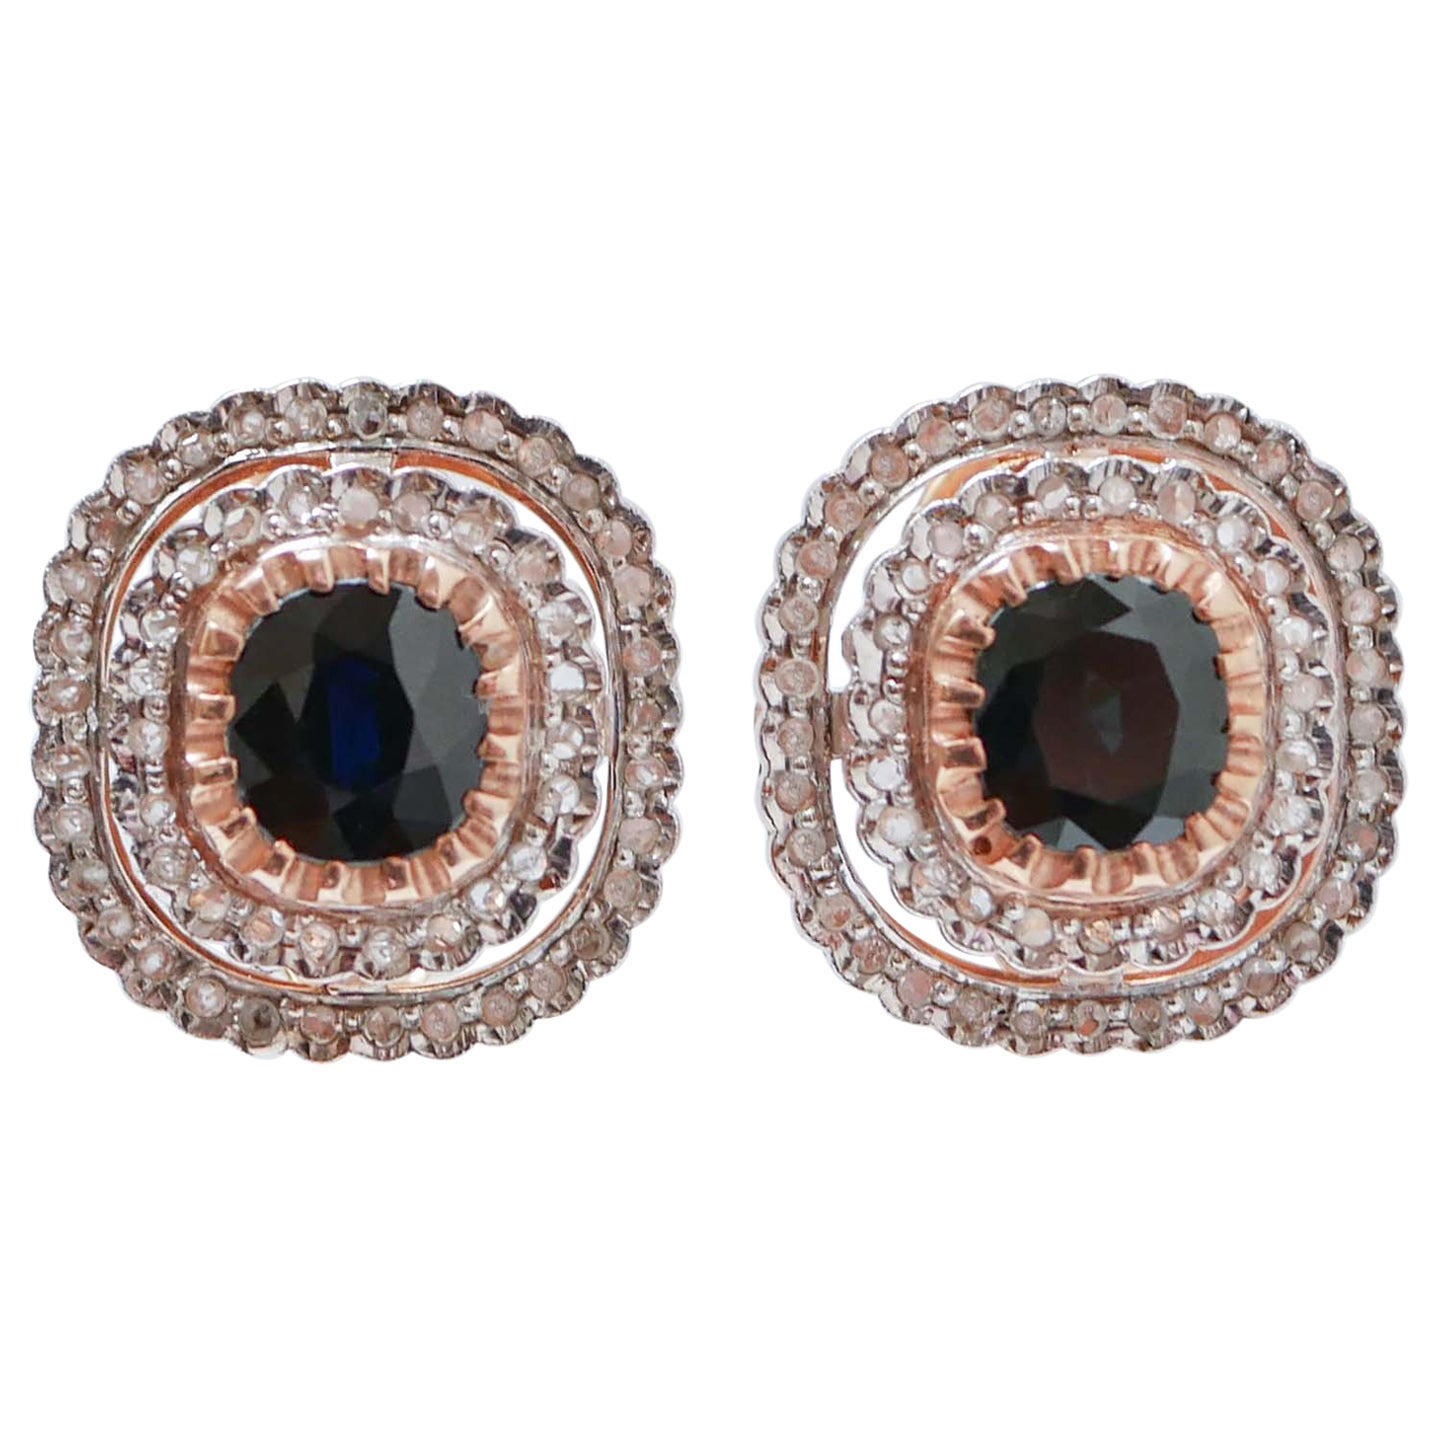 Sapphires, Diamonds, Rose Gold and Silver Earrings. For Sale